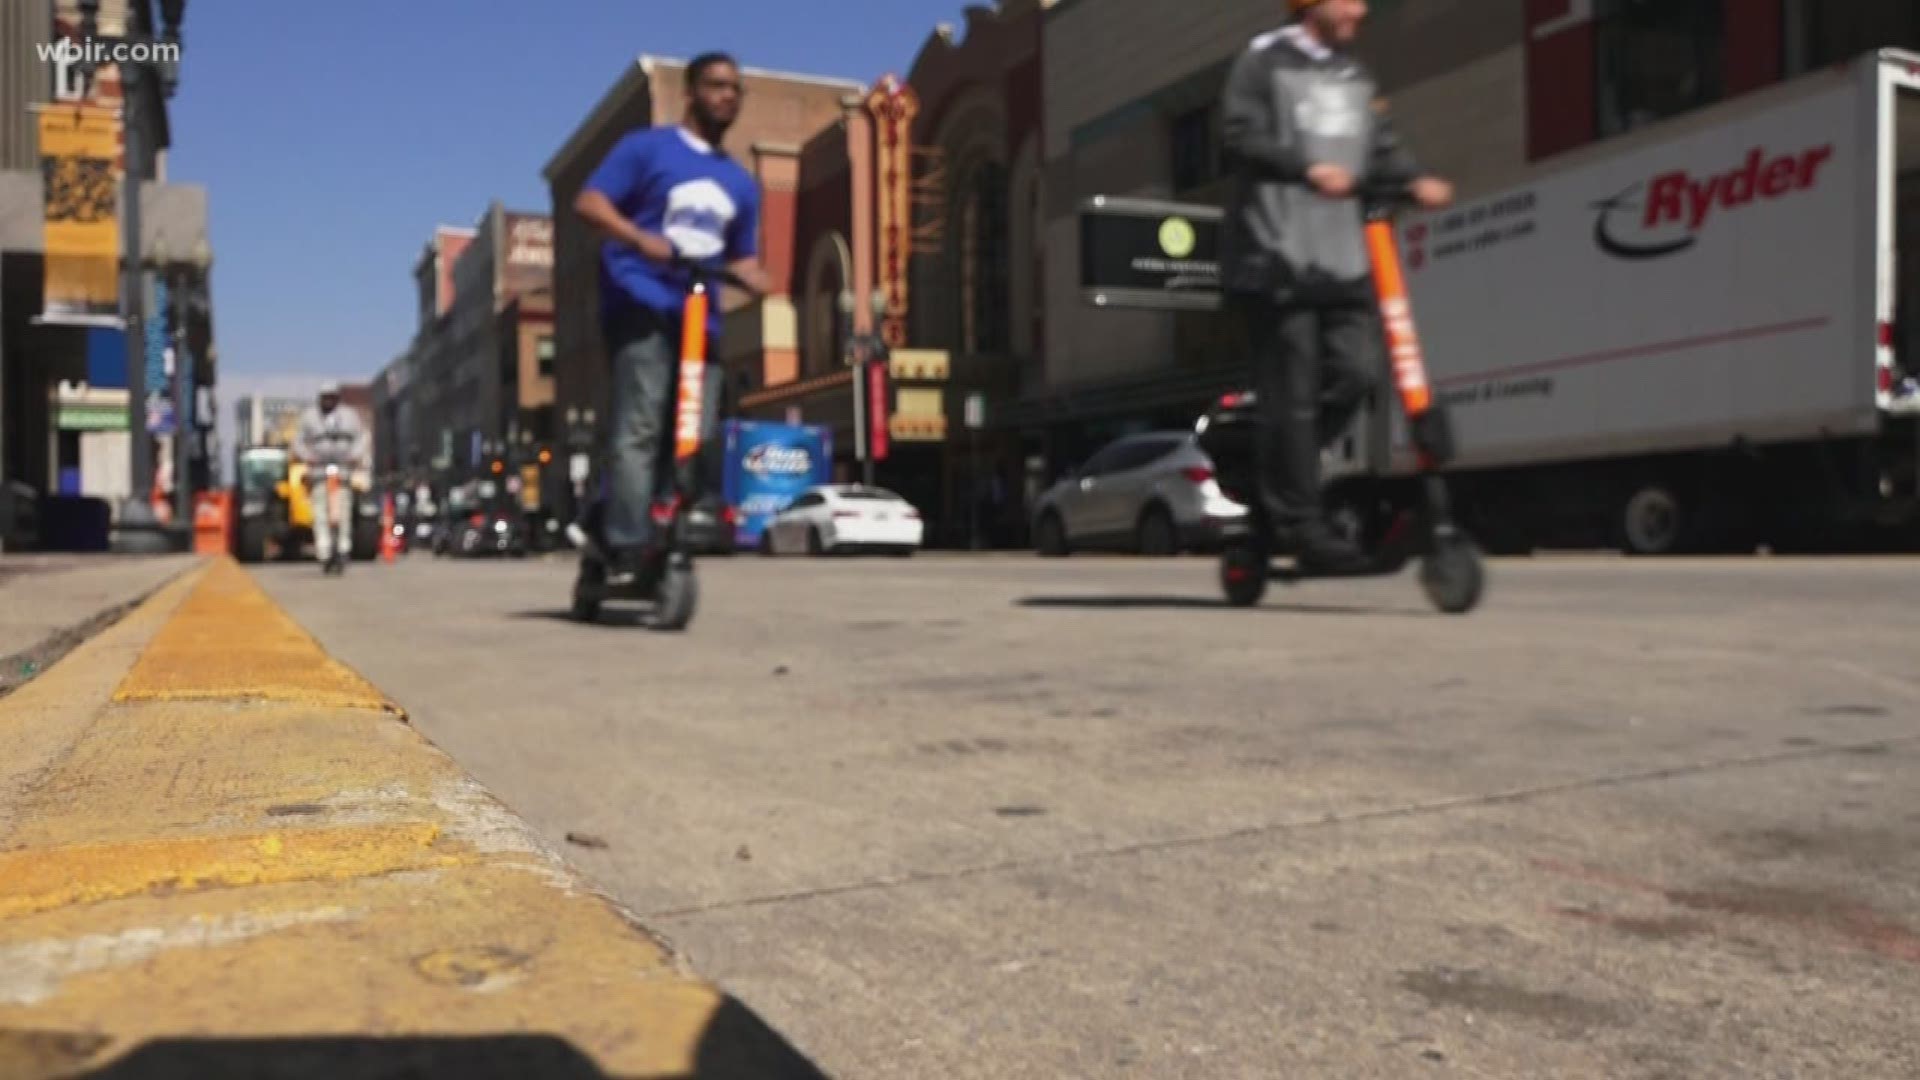 Knoxville's new electric scooters launched Wednesday, but that evening they hit the breaks for a bit.